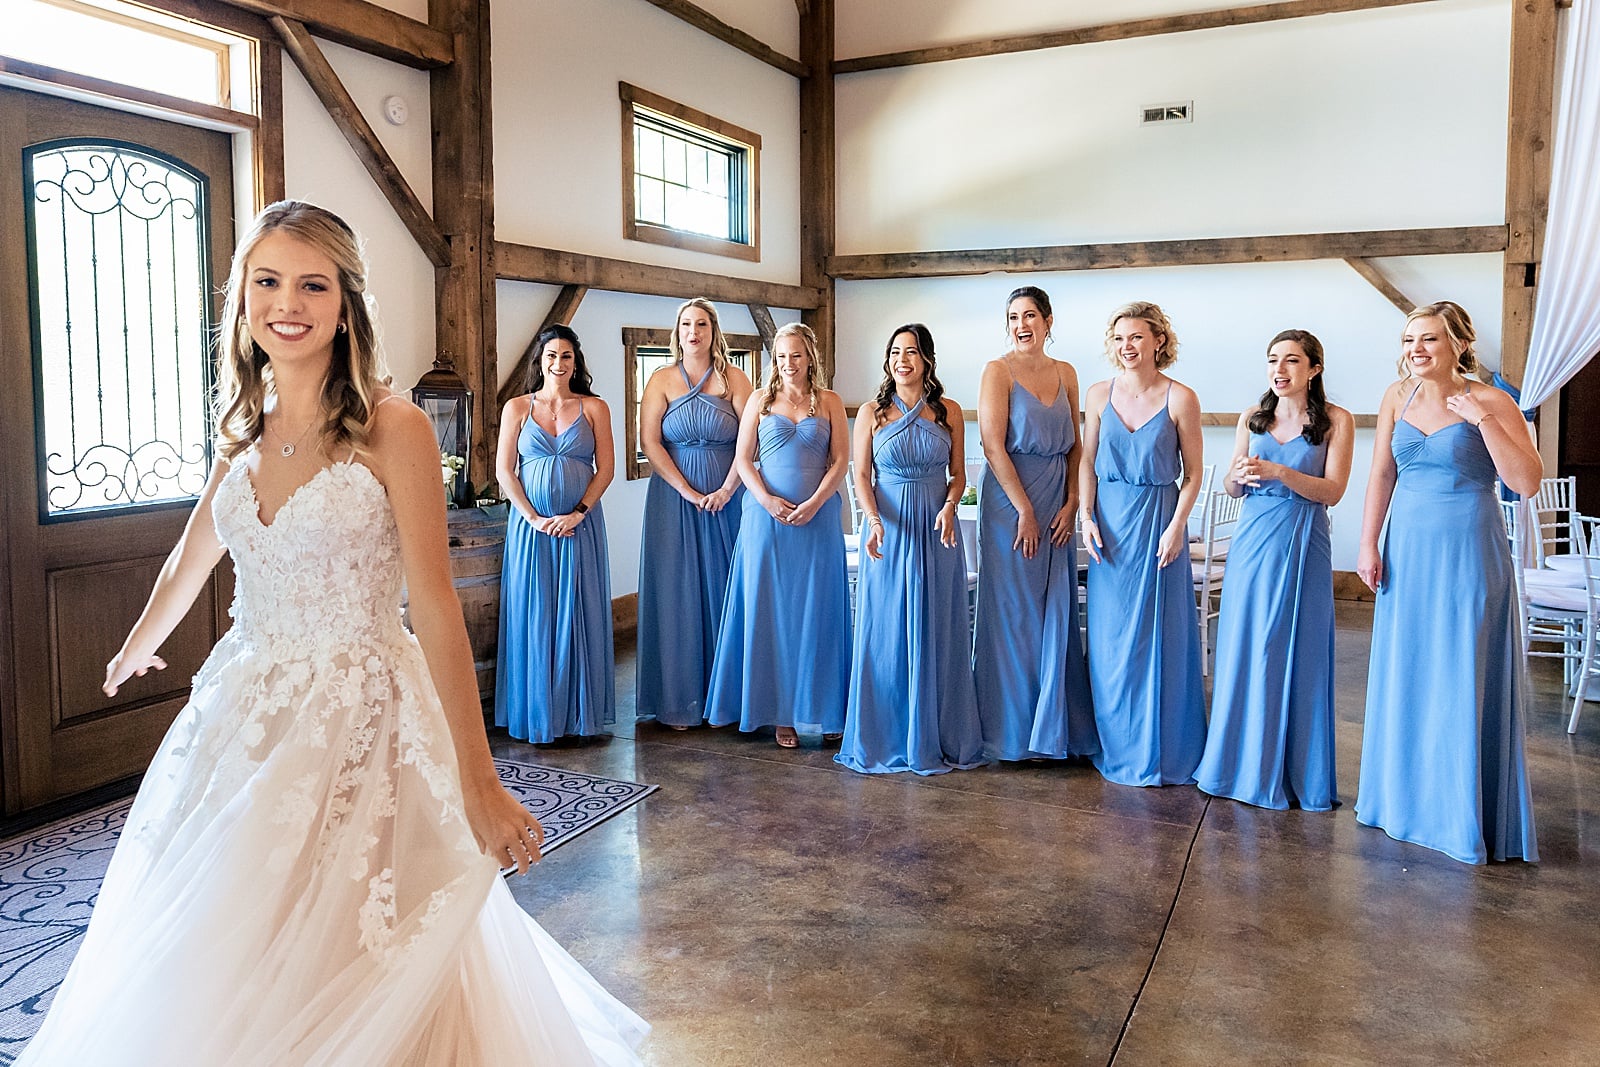 doing a first look with your bridesmaids is a great idea